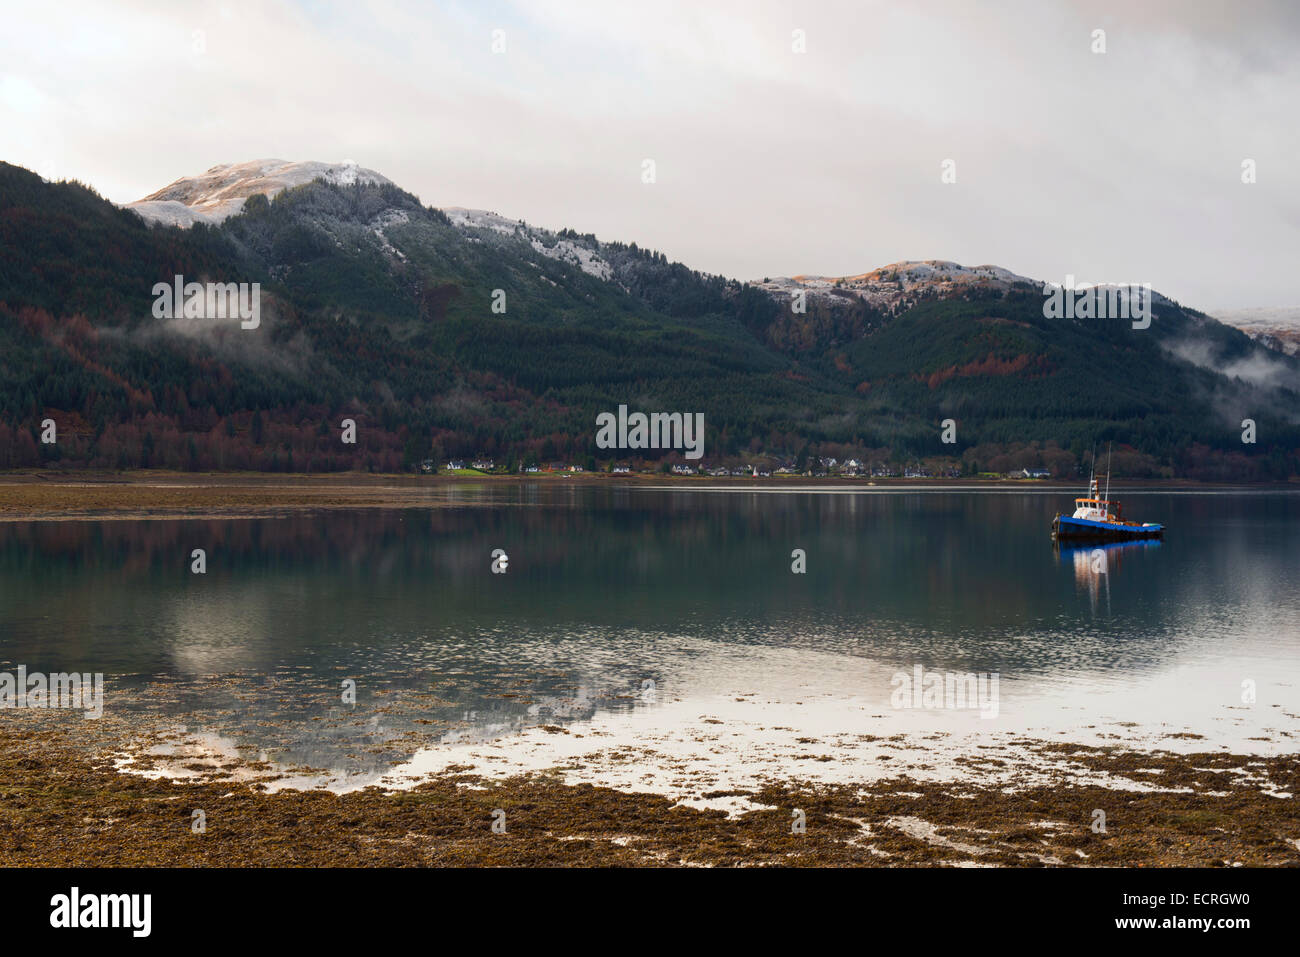 Invershiel on the banks of Loch Duich in the Highlands of Scotland, UK Stock Photo